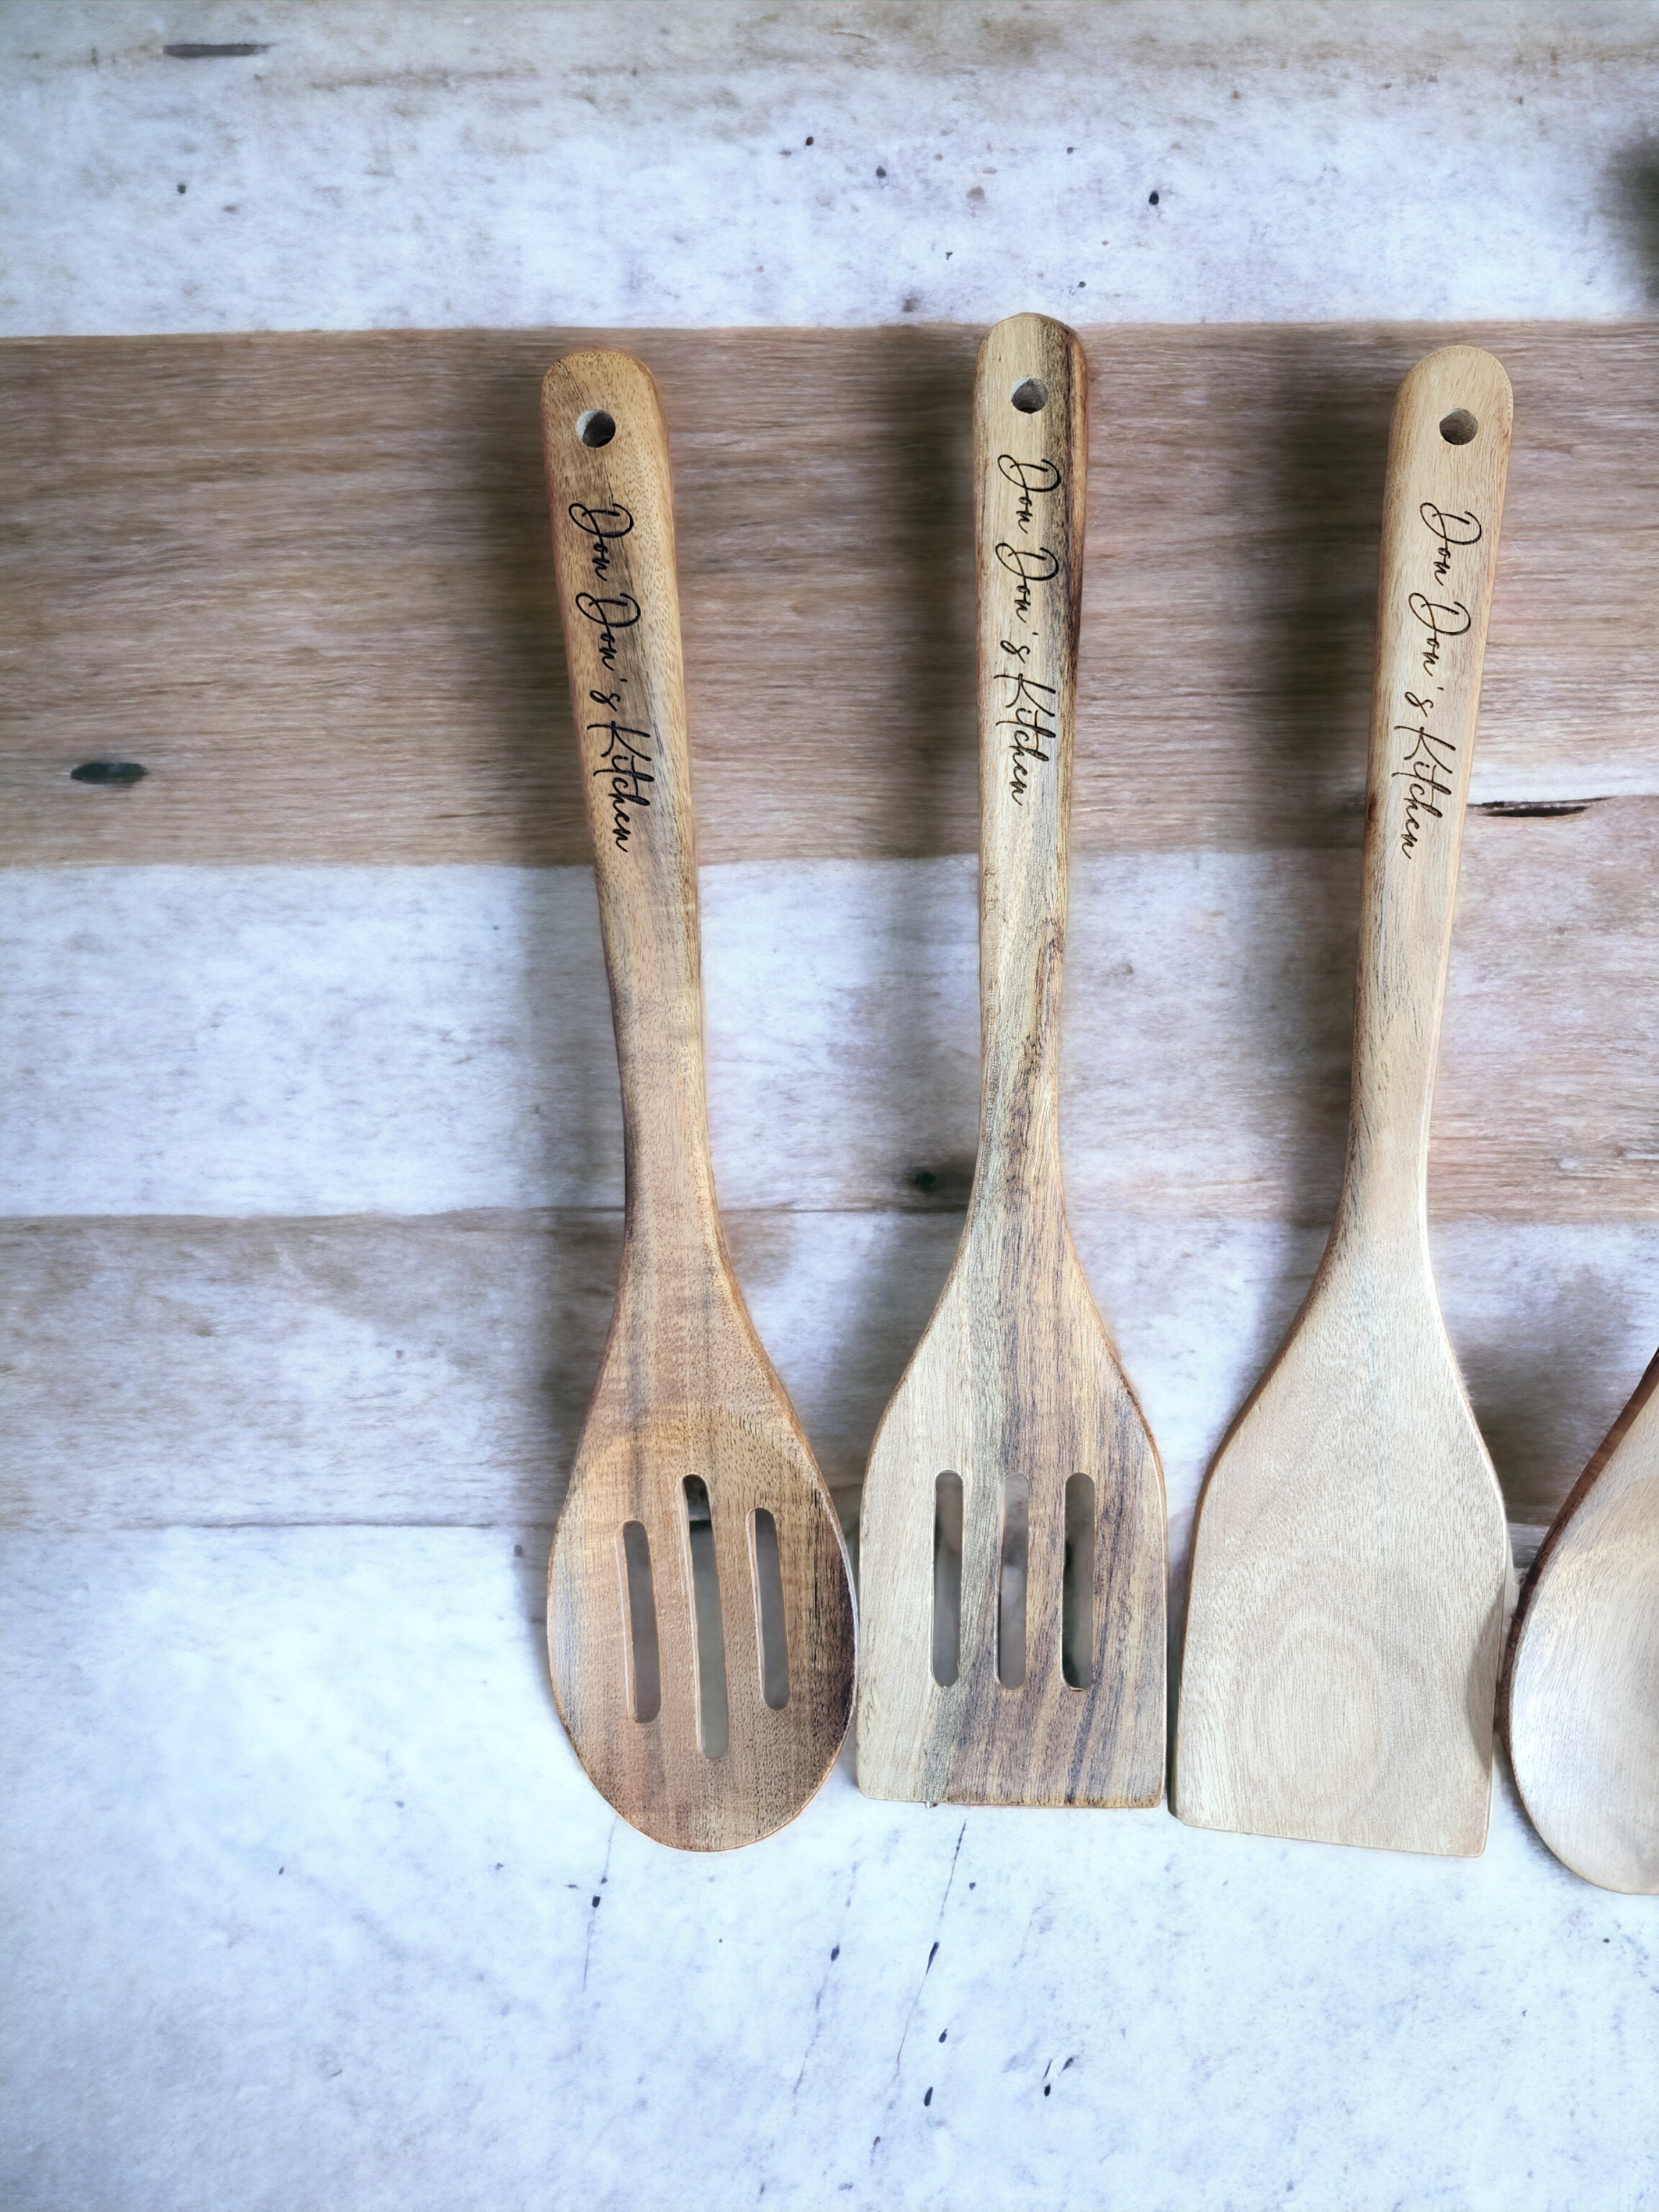 Customized 6 Piece Wooden Cooking Utensil Set